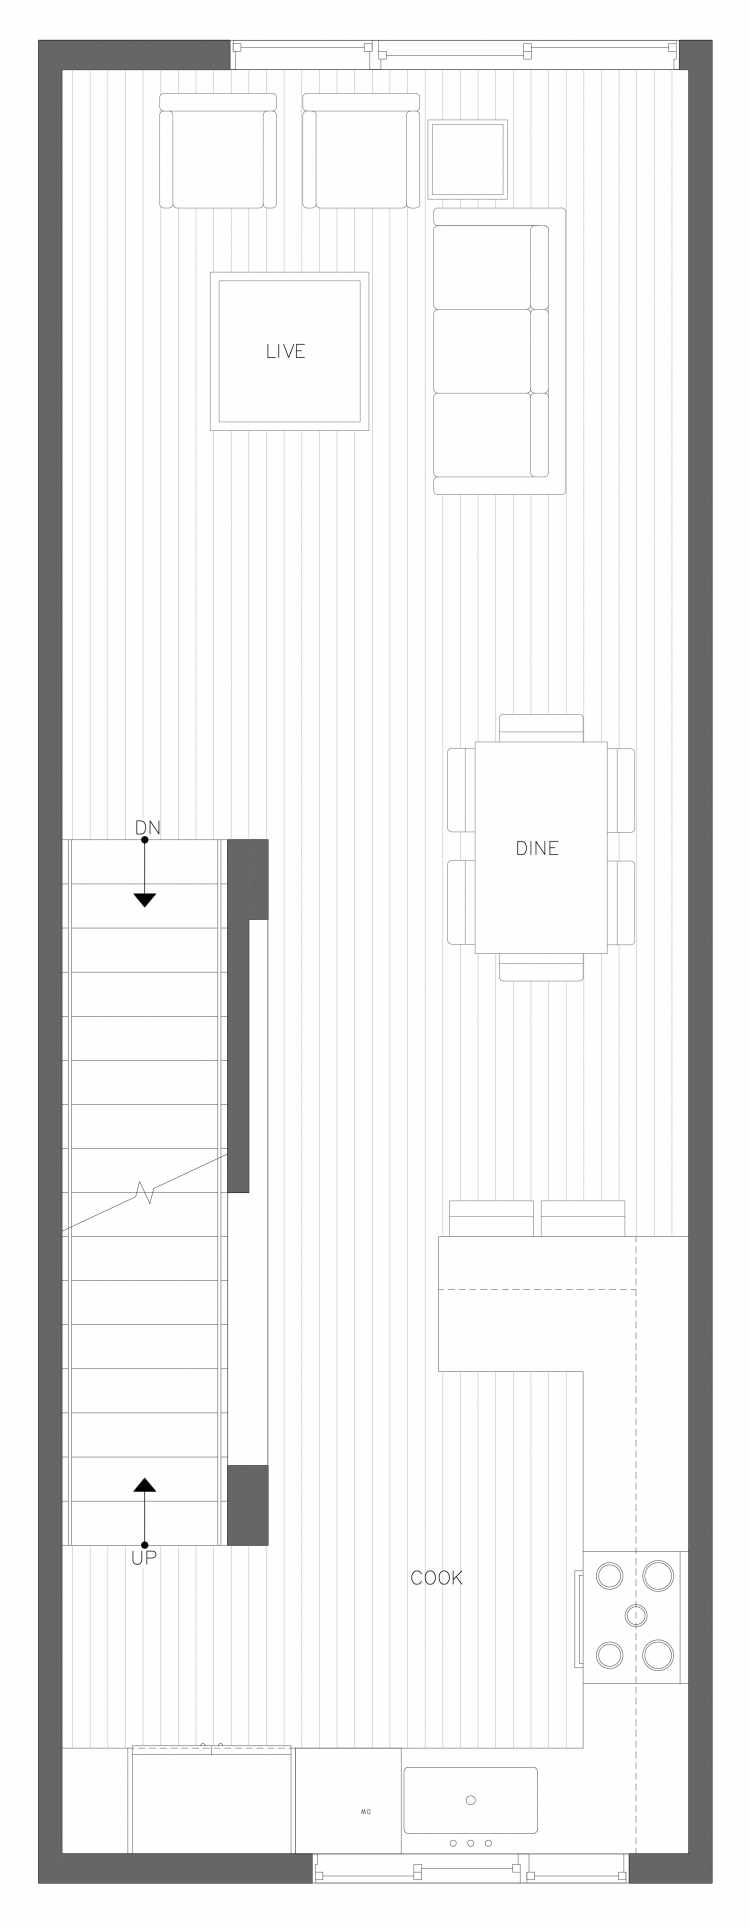 Second Floor Plan of 3418B 15th Ave W, One of the Arlo Townhomes in North Queen Anne